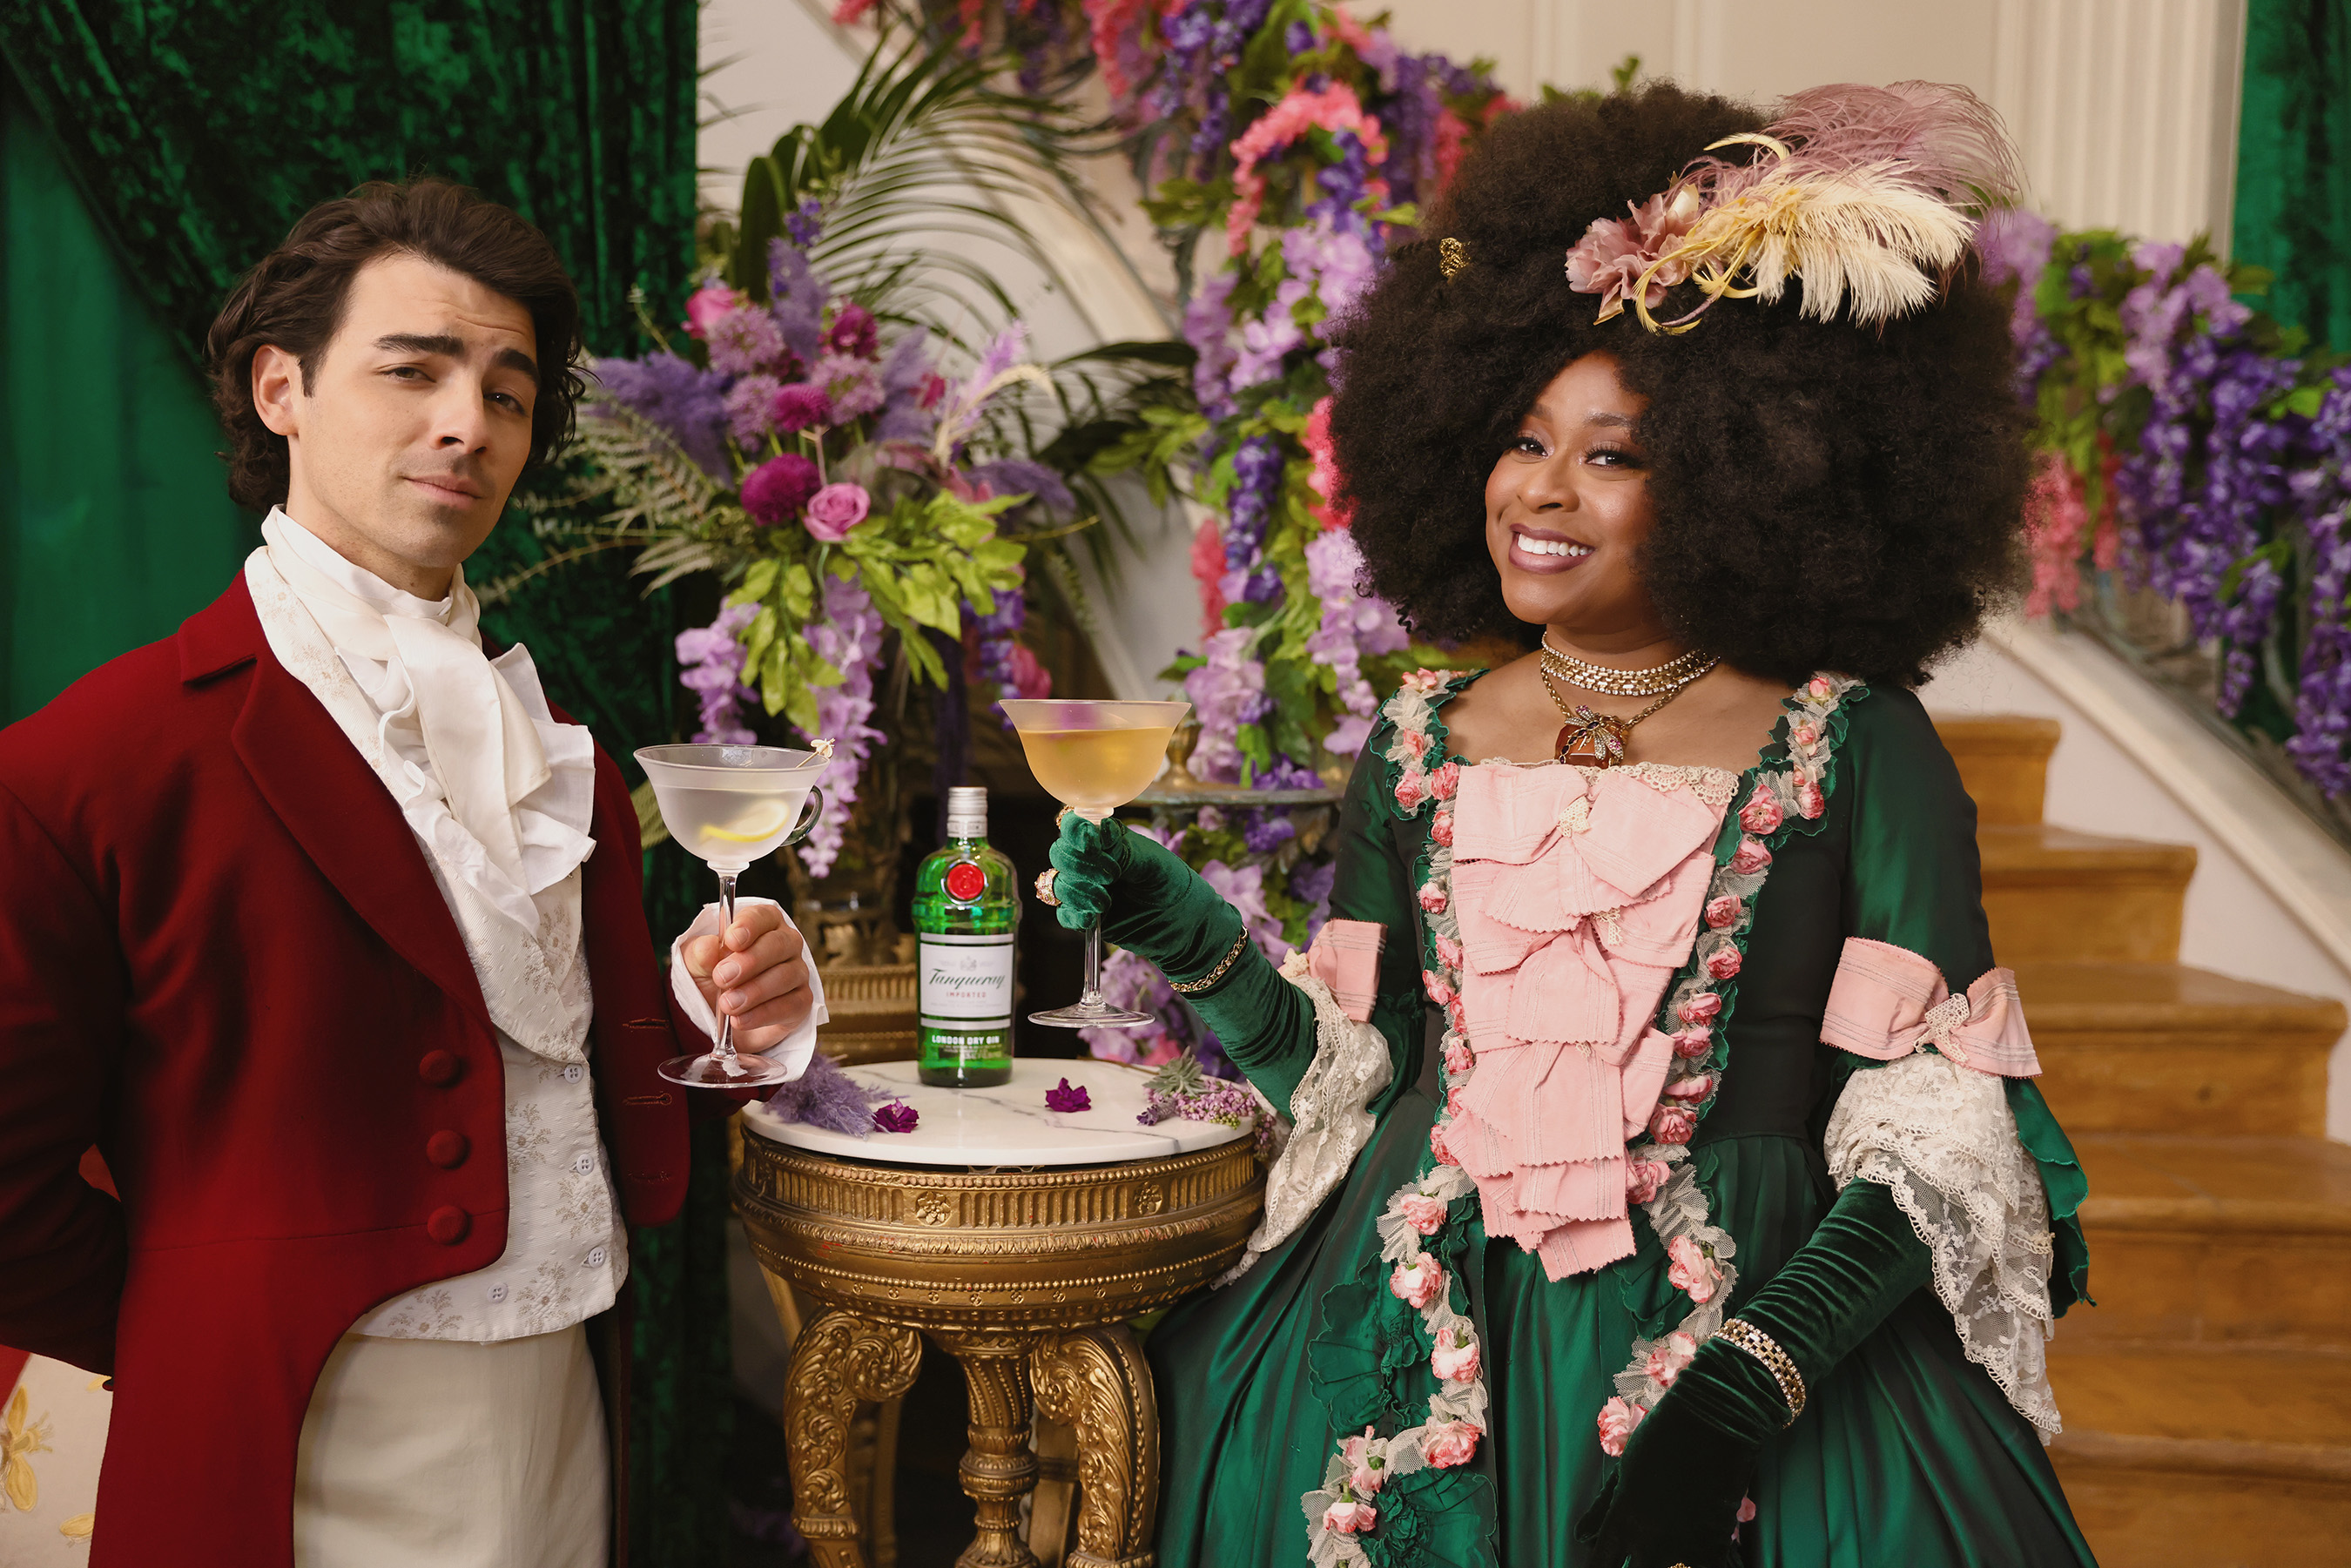 Joe Jonas teamed up with Tanqueray to learn “how to become a Bridgerton” with help from superfan and comedian Phoebe Robinson